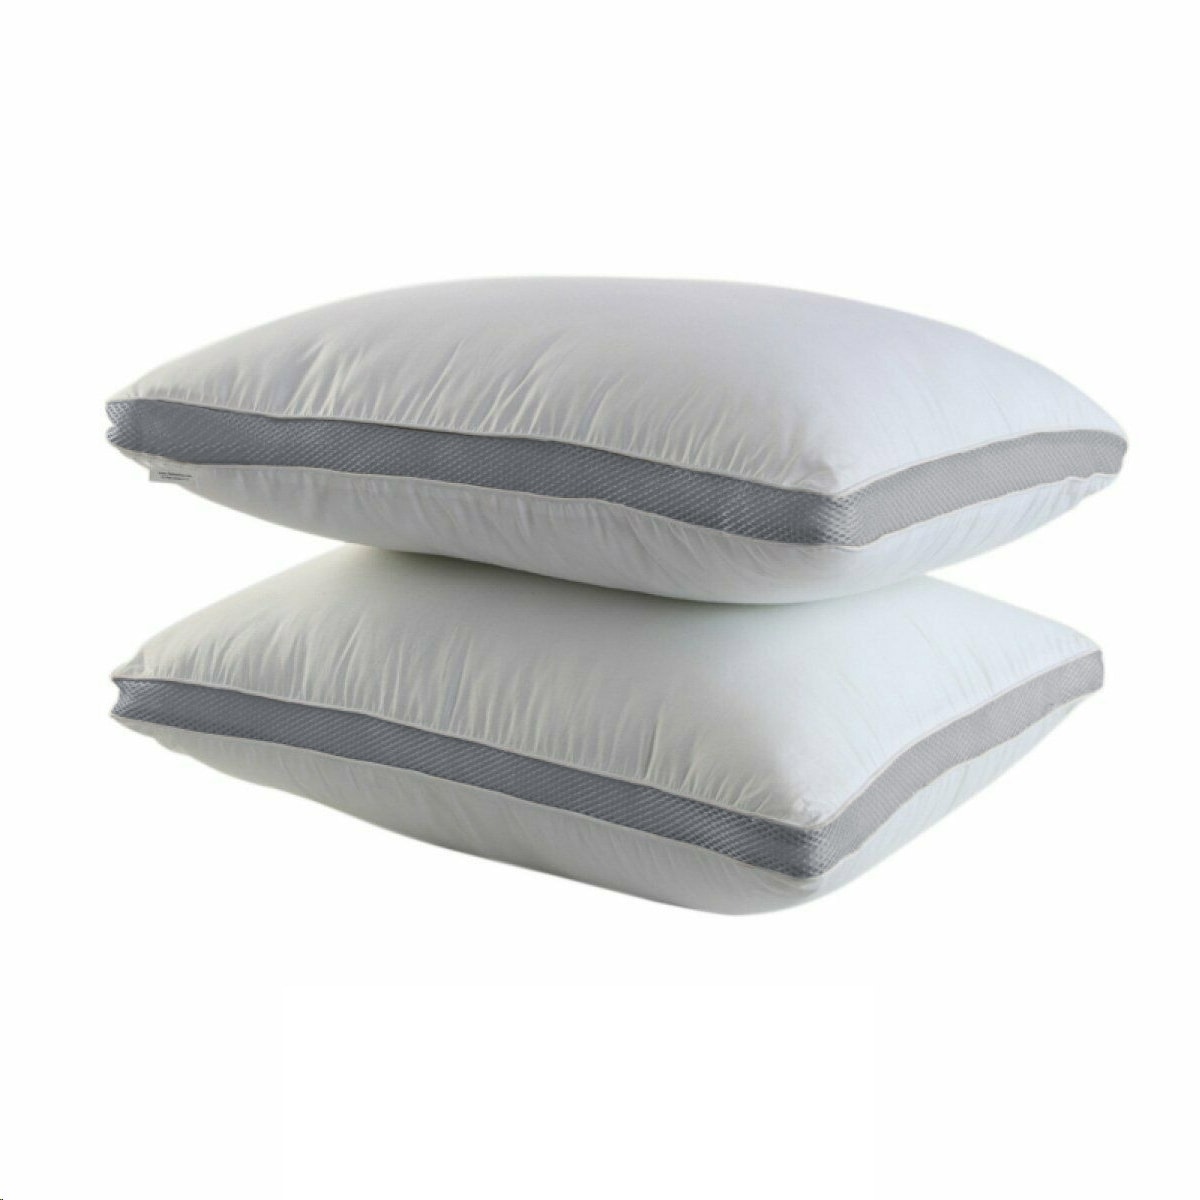 https://ak1.ostkcdn.com/images/products/is/images/direct/23045dc0bf407c31b52bcf13dc8f5e8622a86272/Cotton-Gusseted-Pillows-%28Set-of-2%29.jpg